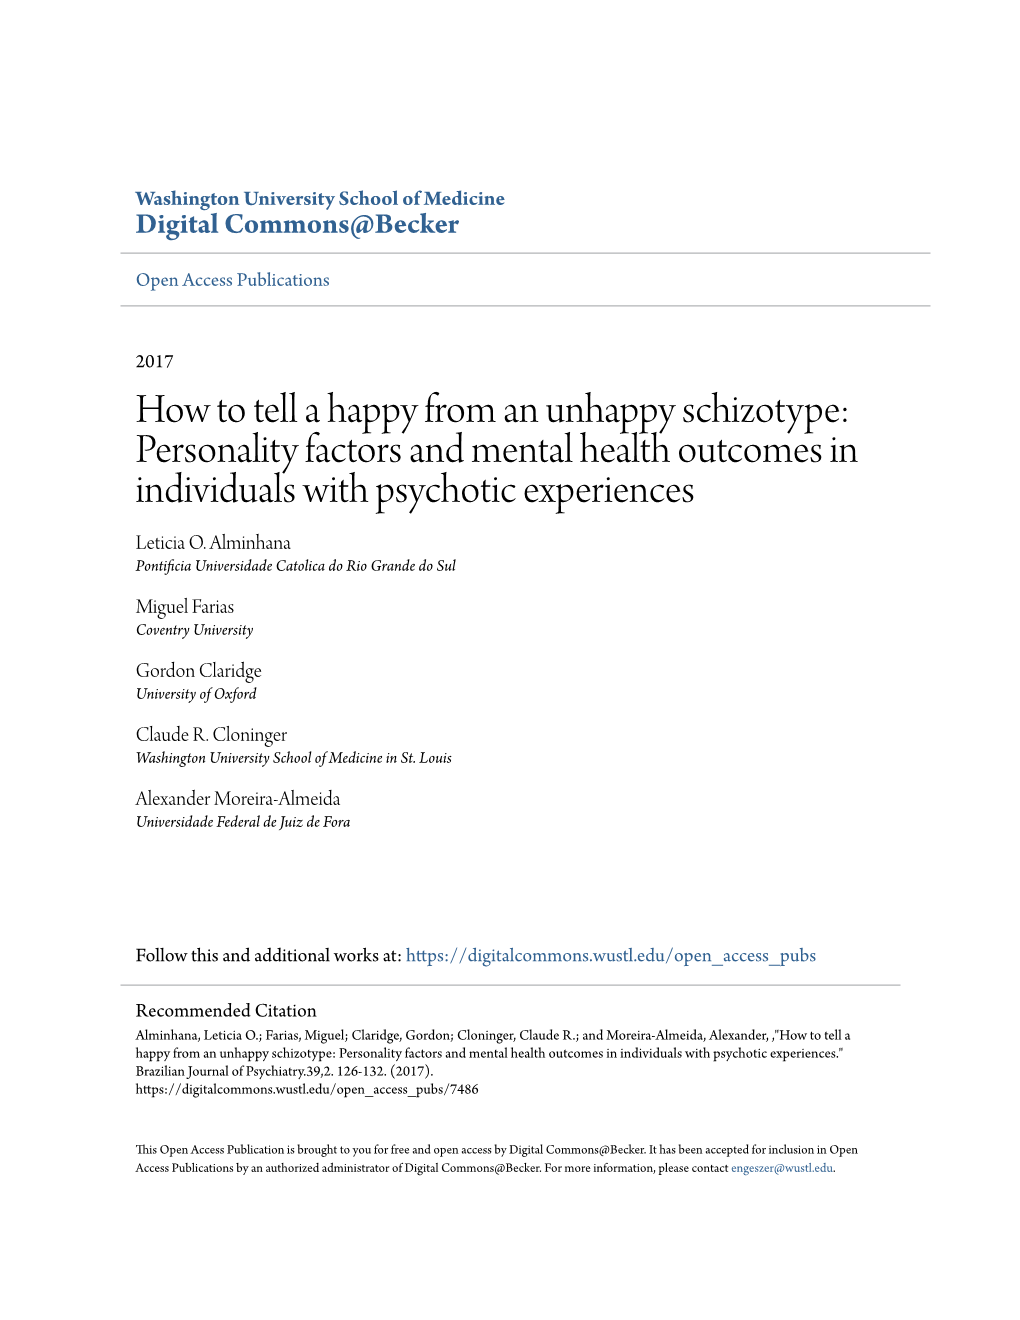 How to Tell a Happy from an Unhappy Schizotype: Personality Factors and Mental Health Outcomes in Individuals with Psychotic Experiences Leticia O